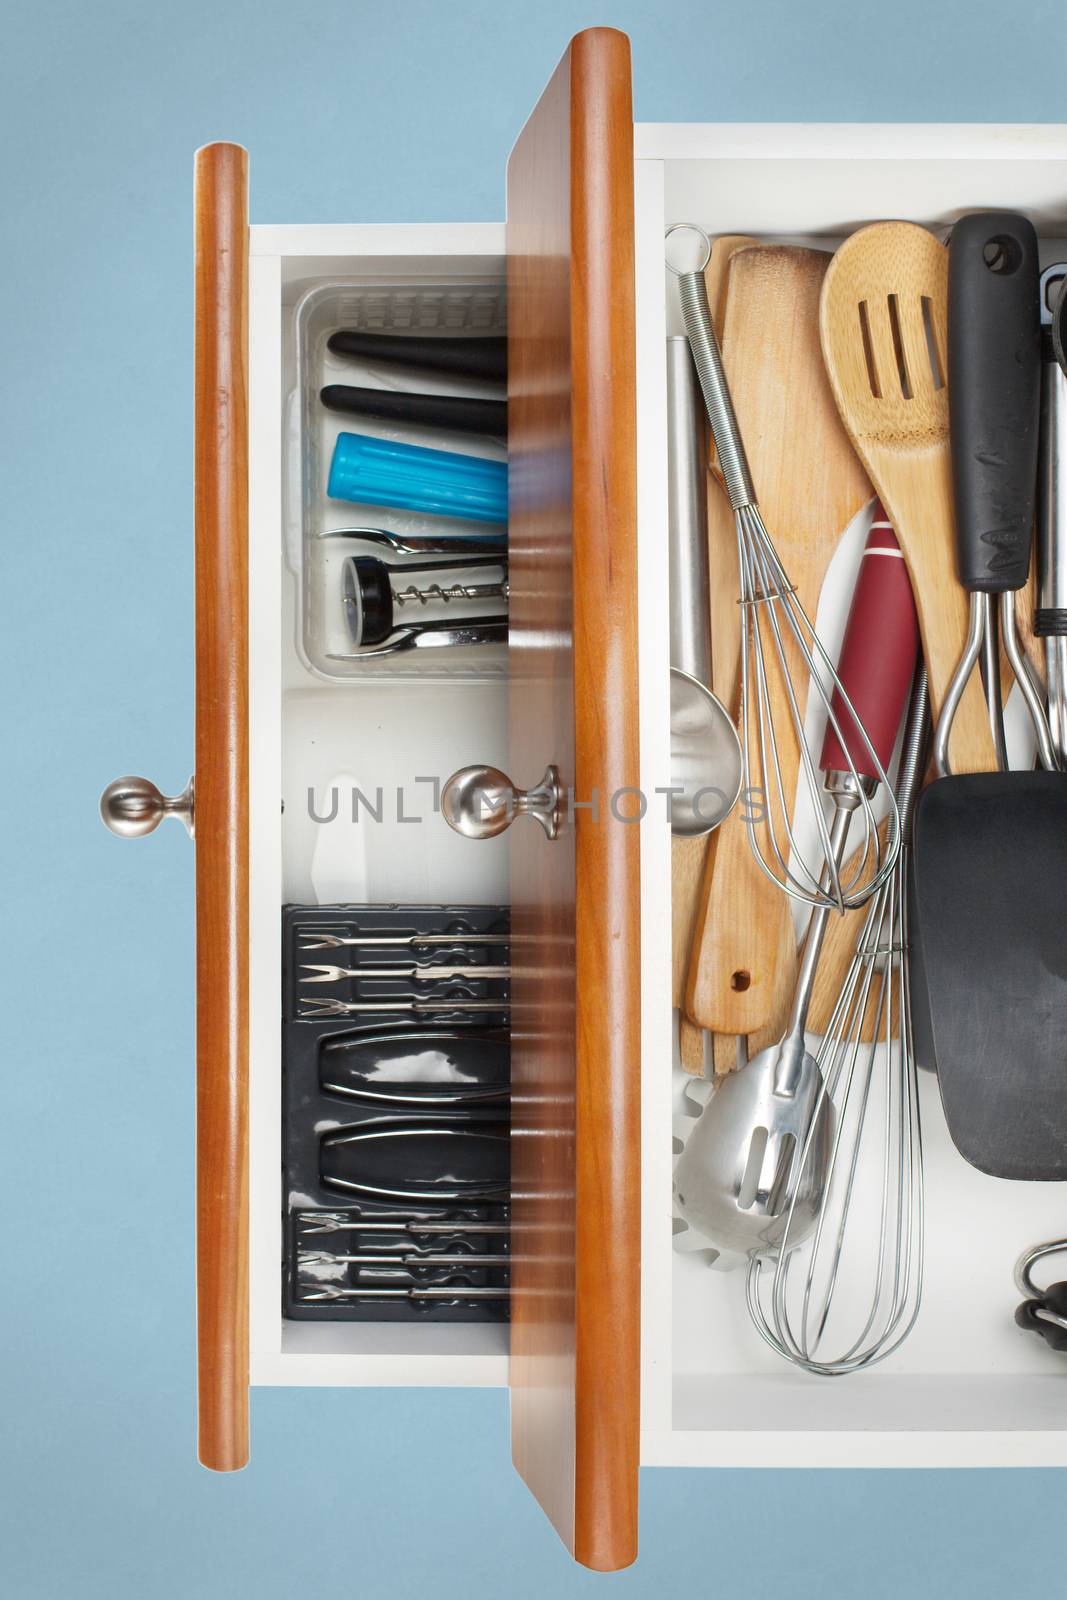 Organized Kitchen Drawers by tab1962